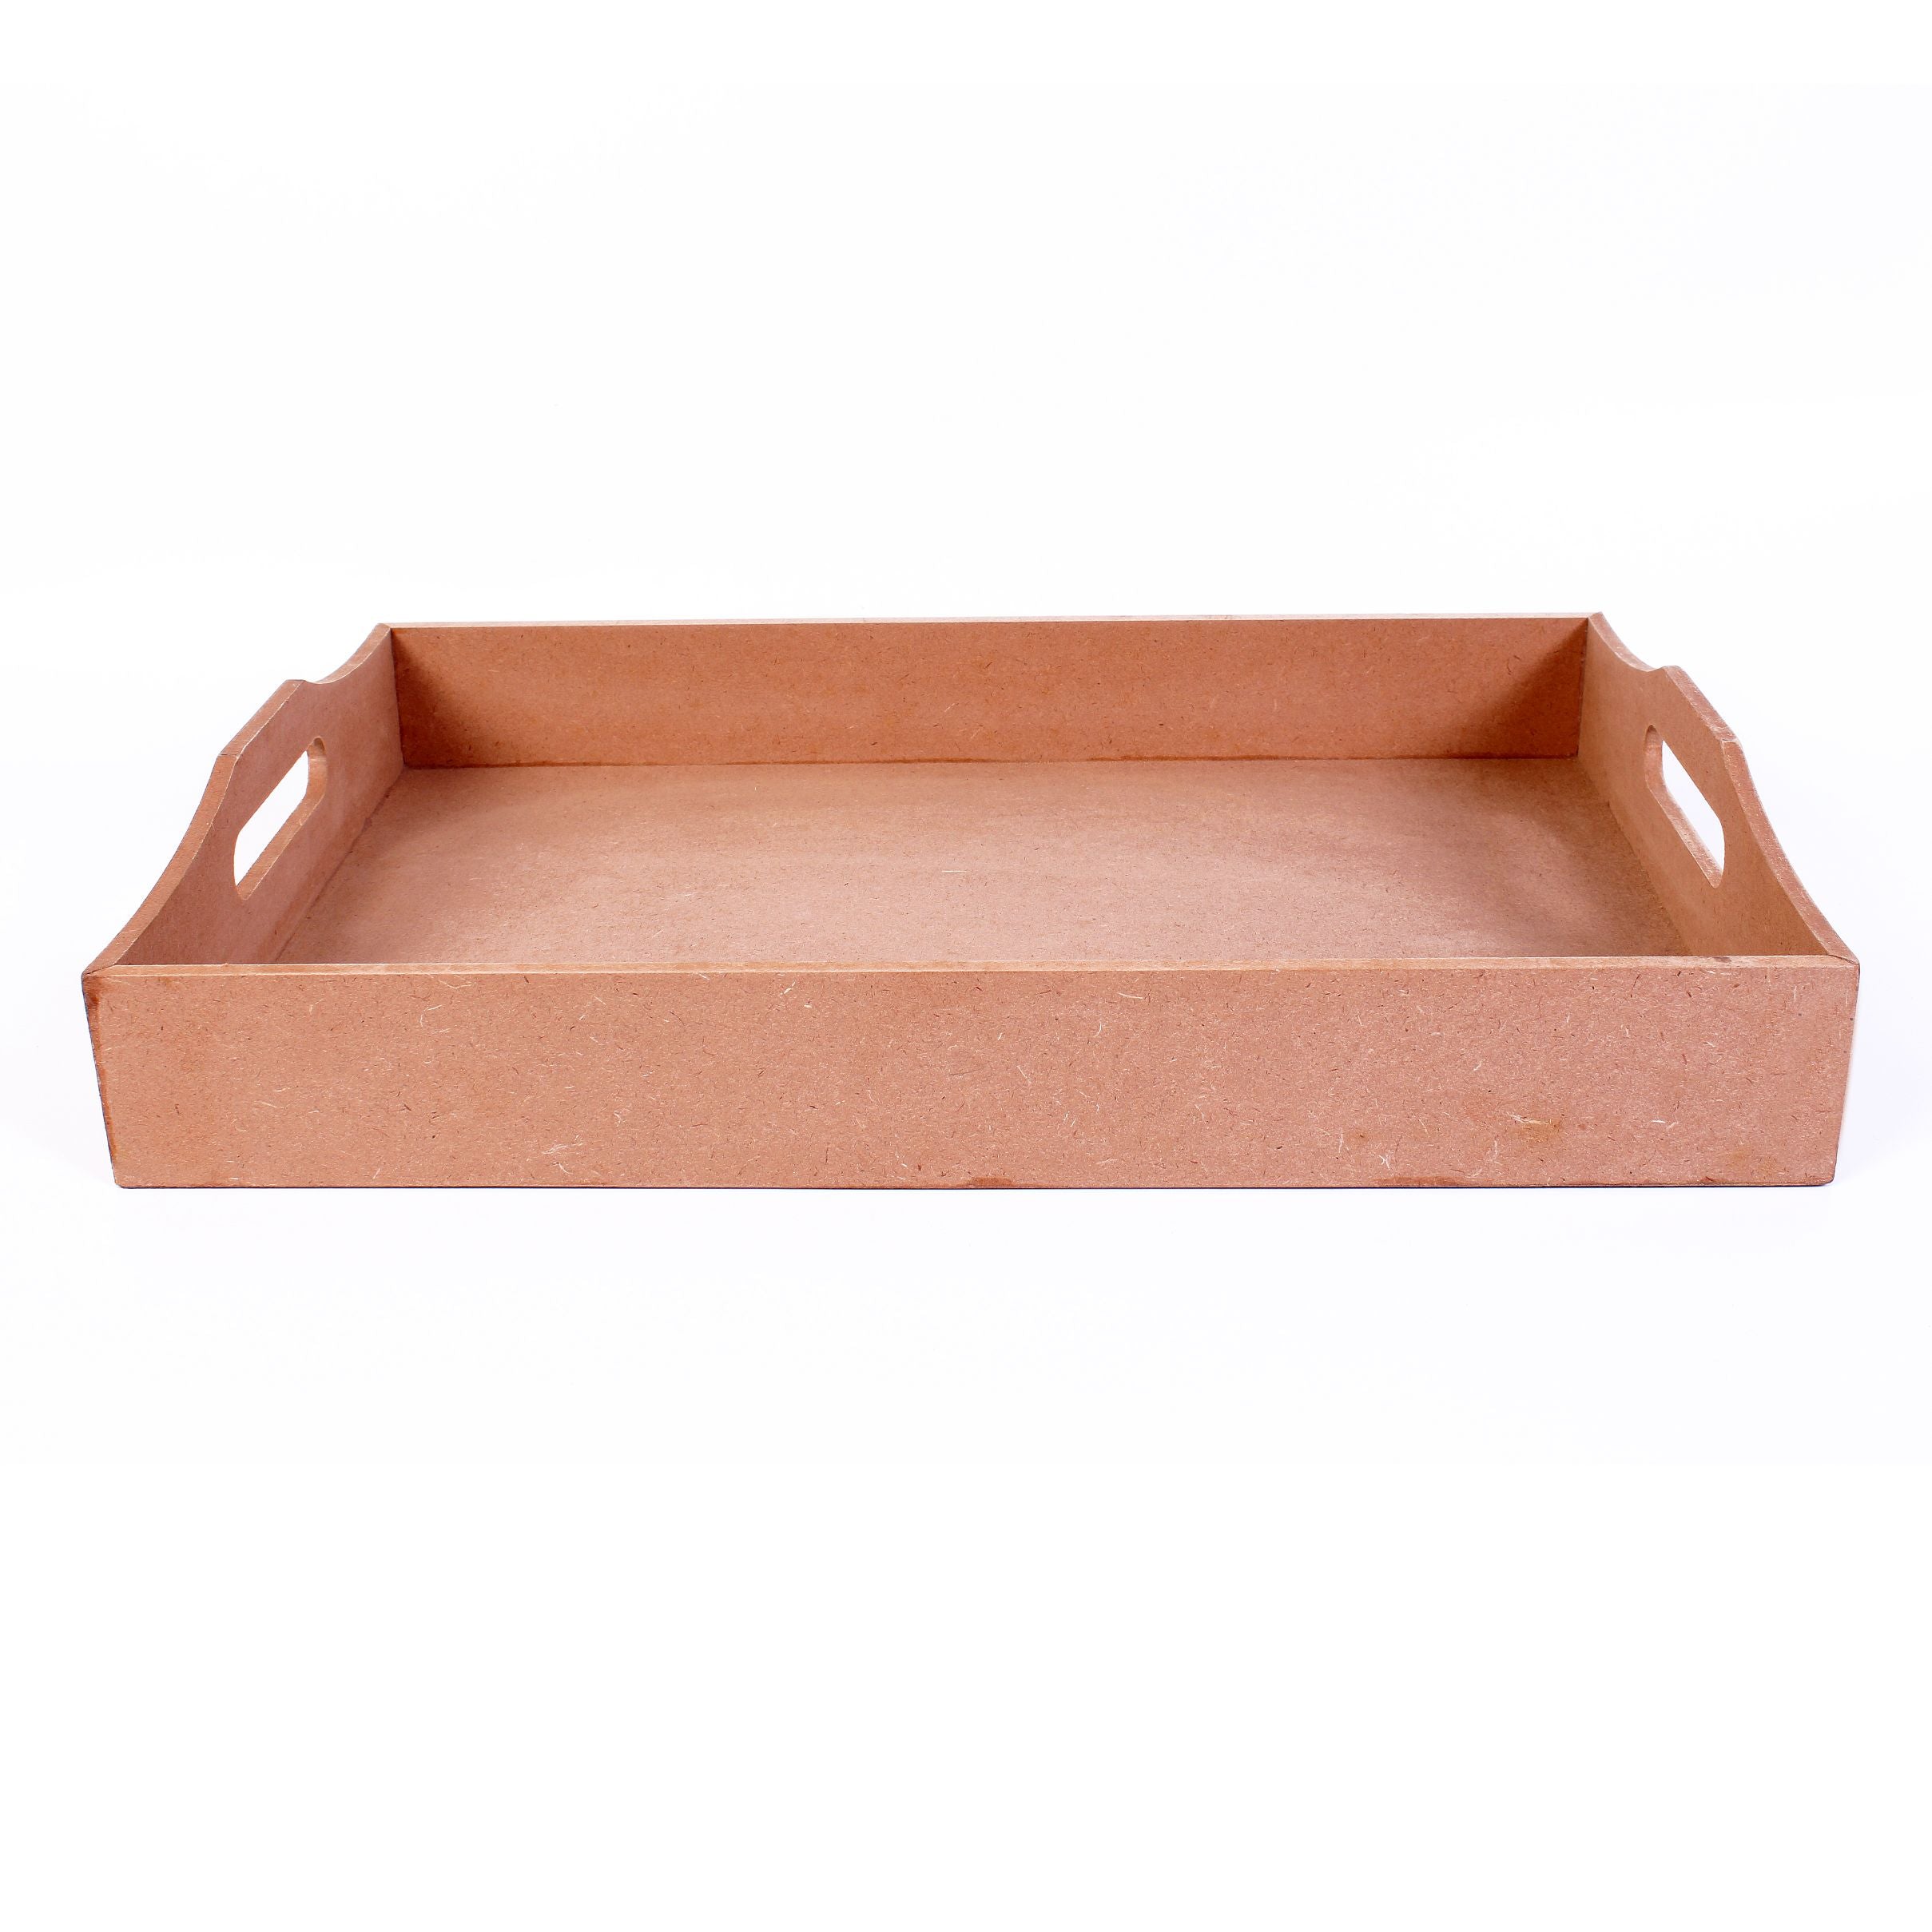 Mdf Serving Tray 10.5 X 15.5 X 2.75Inch 5.5Mm Thick 1Pc Lb